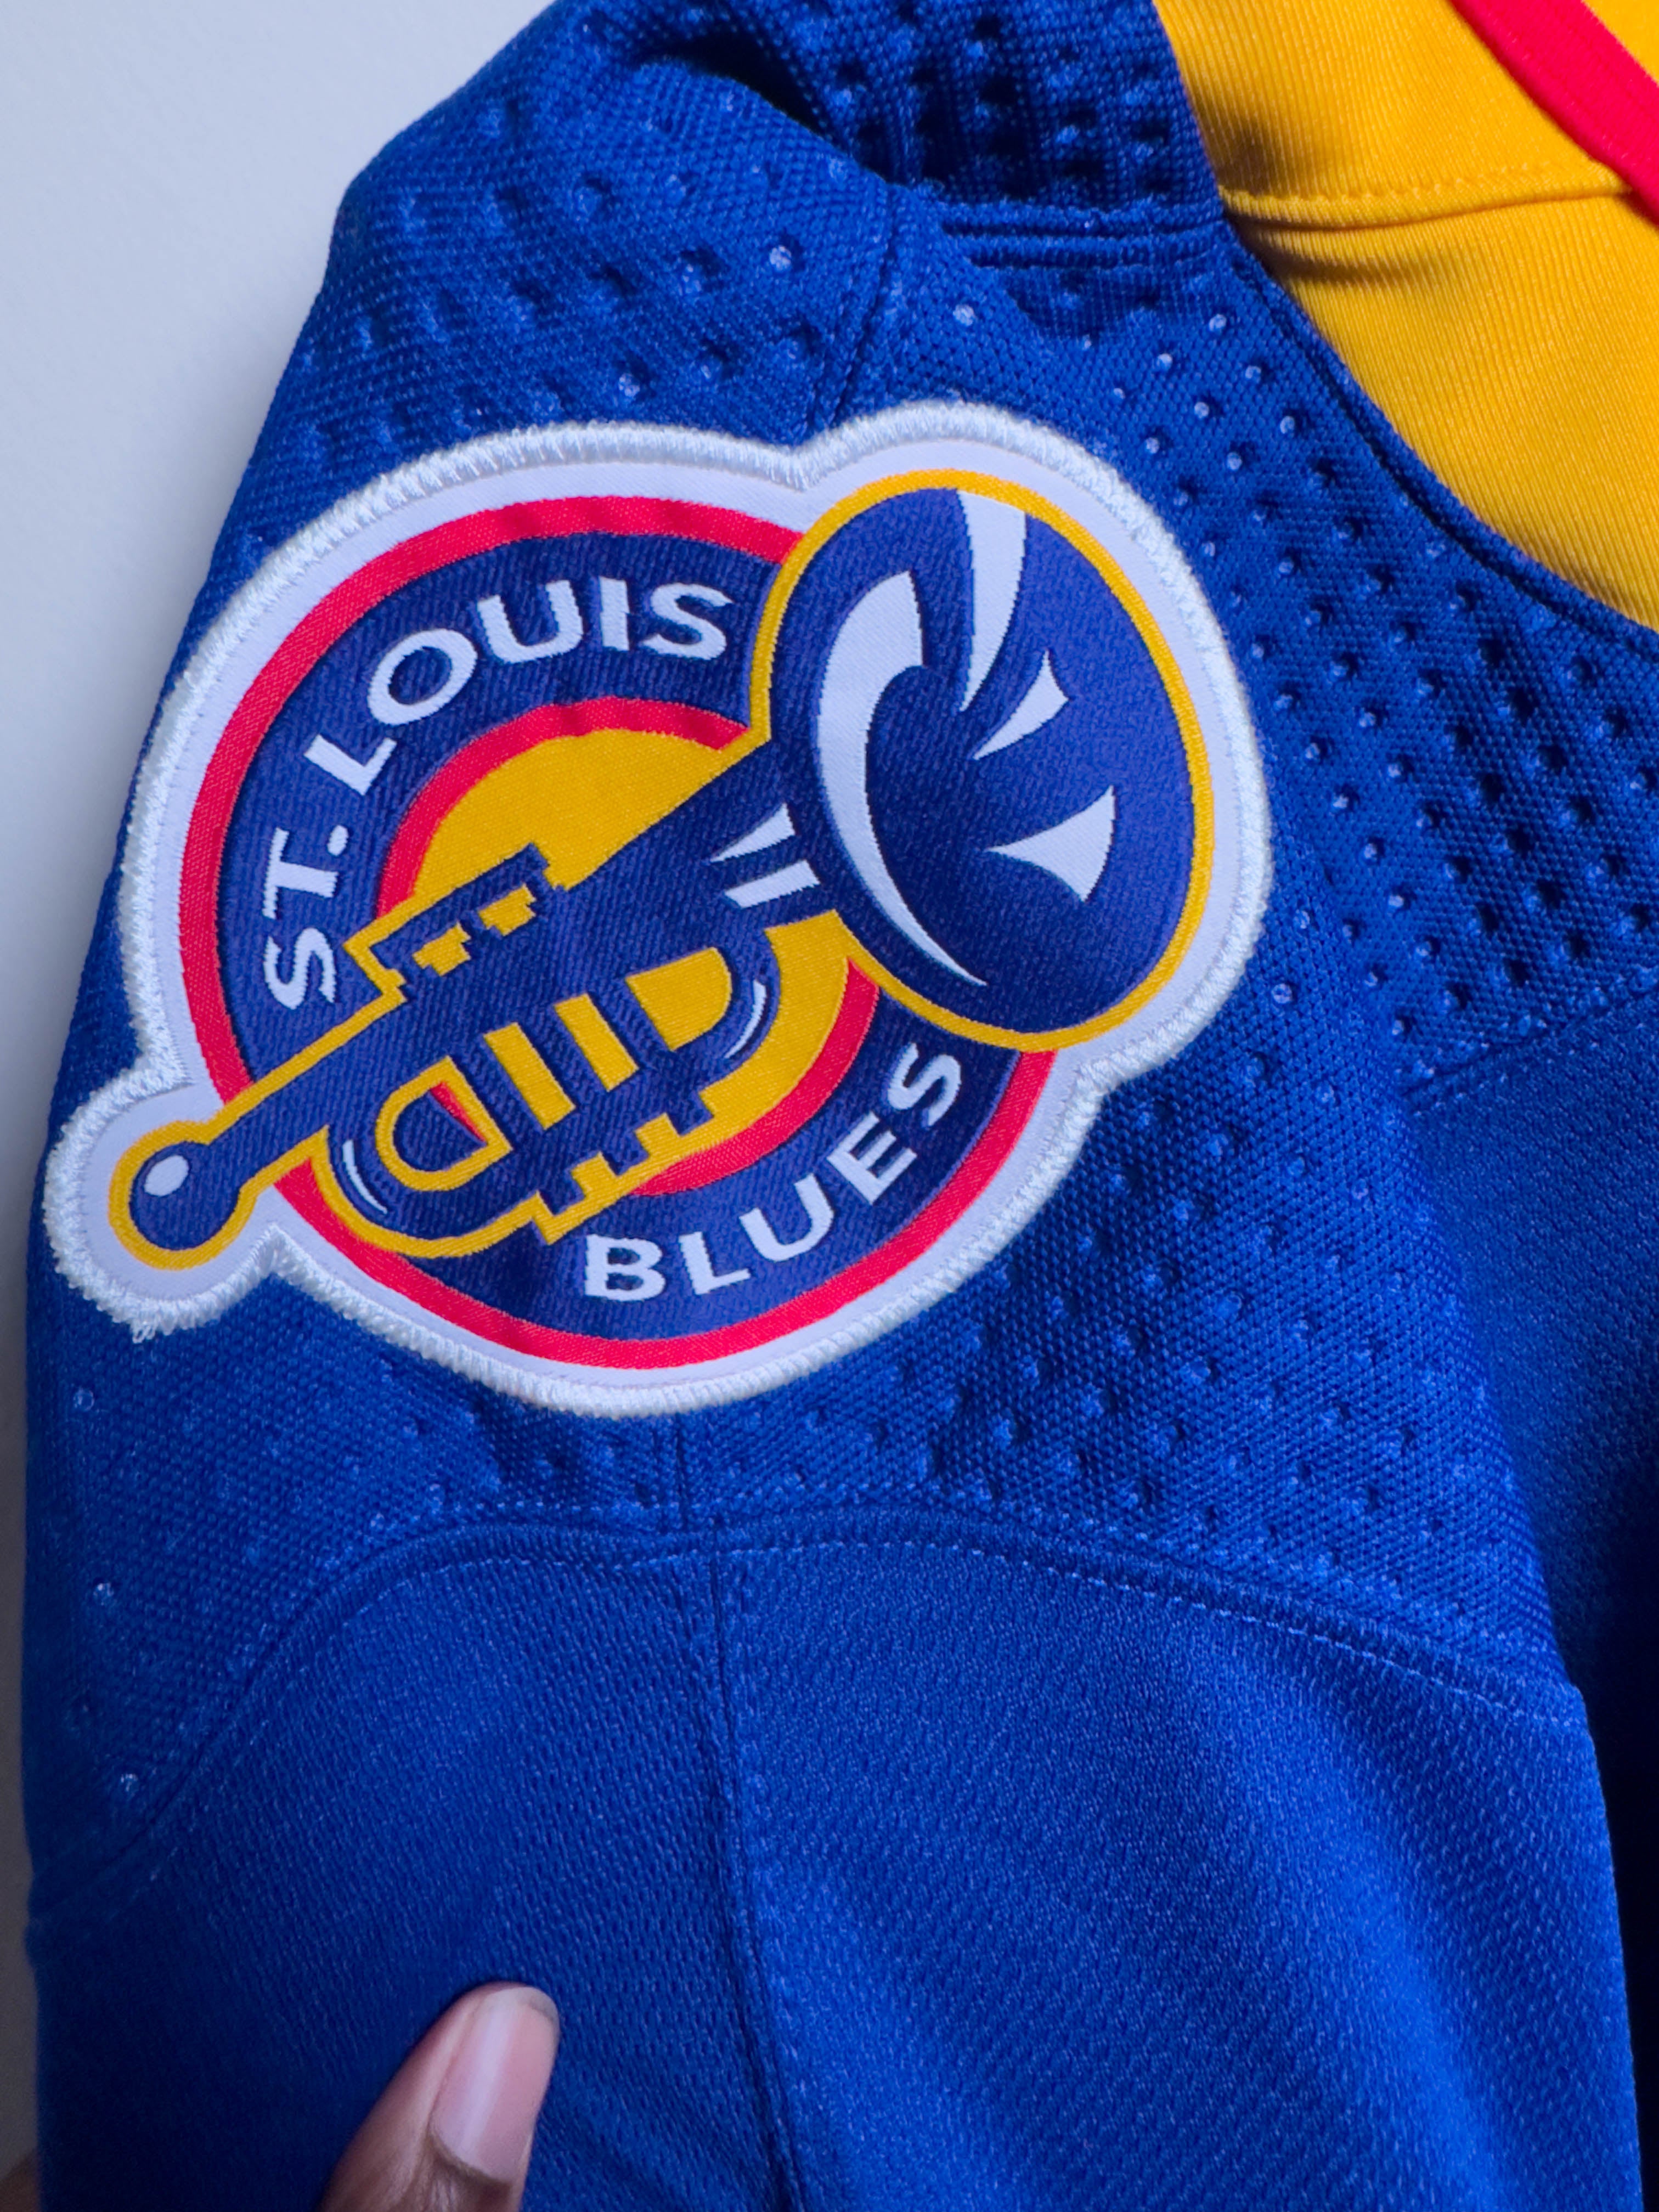 St. Louis Blues NHL Adidas MiC Team Issued 90's Vintage Jersey Size 58G (Goalie Cut)